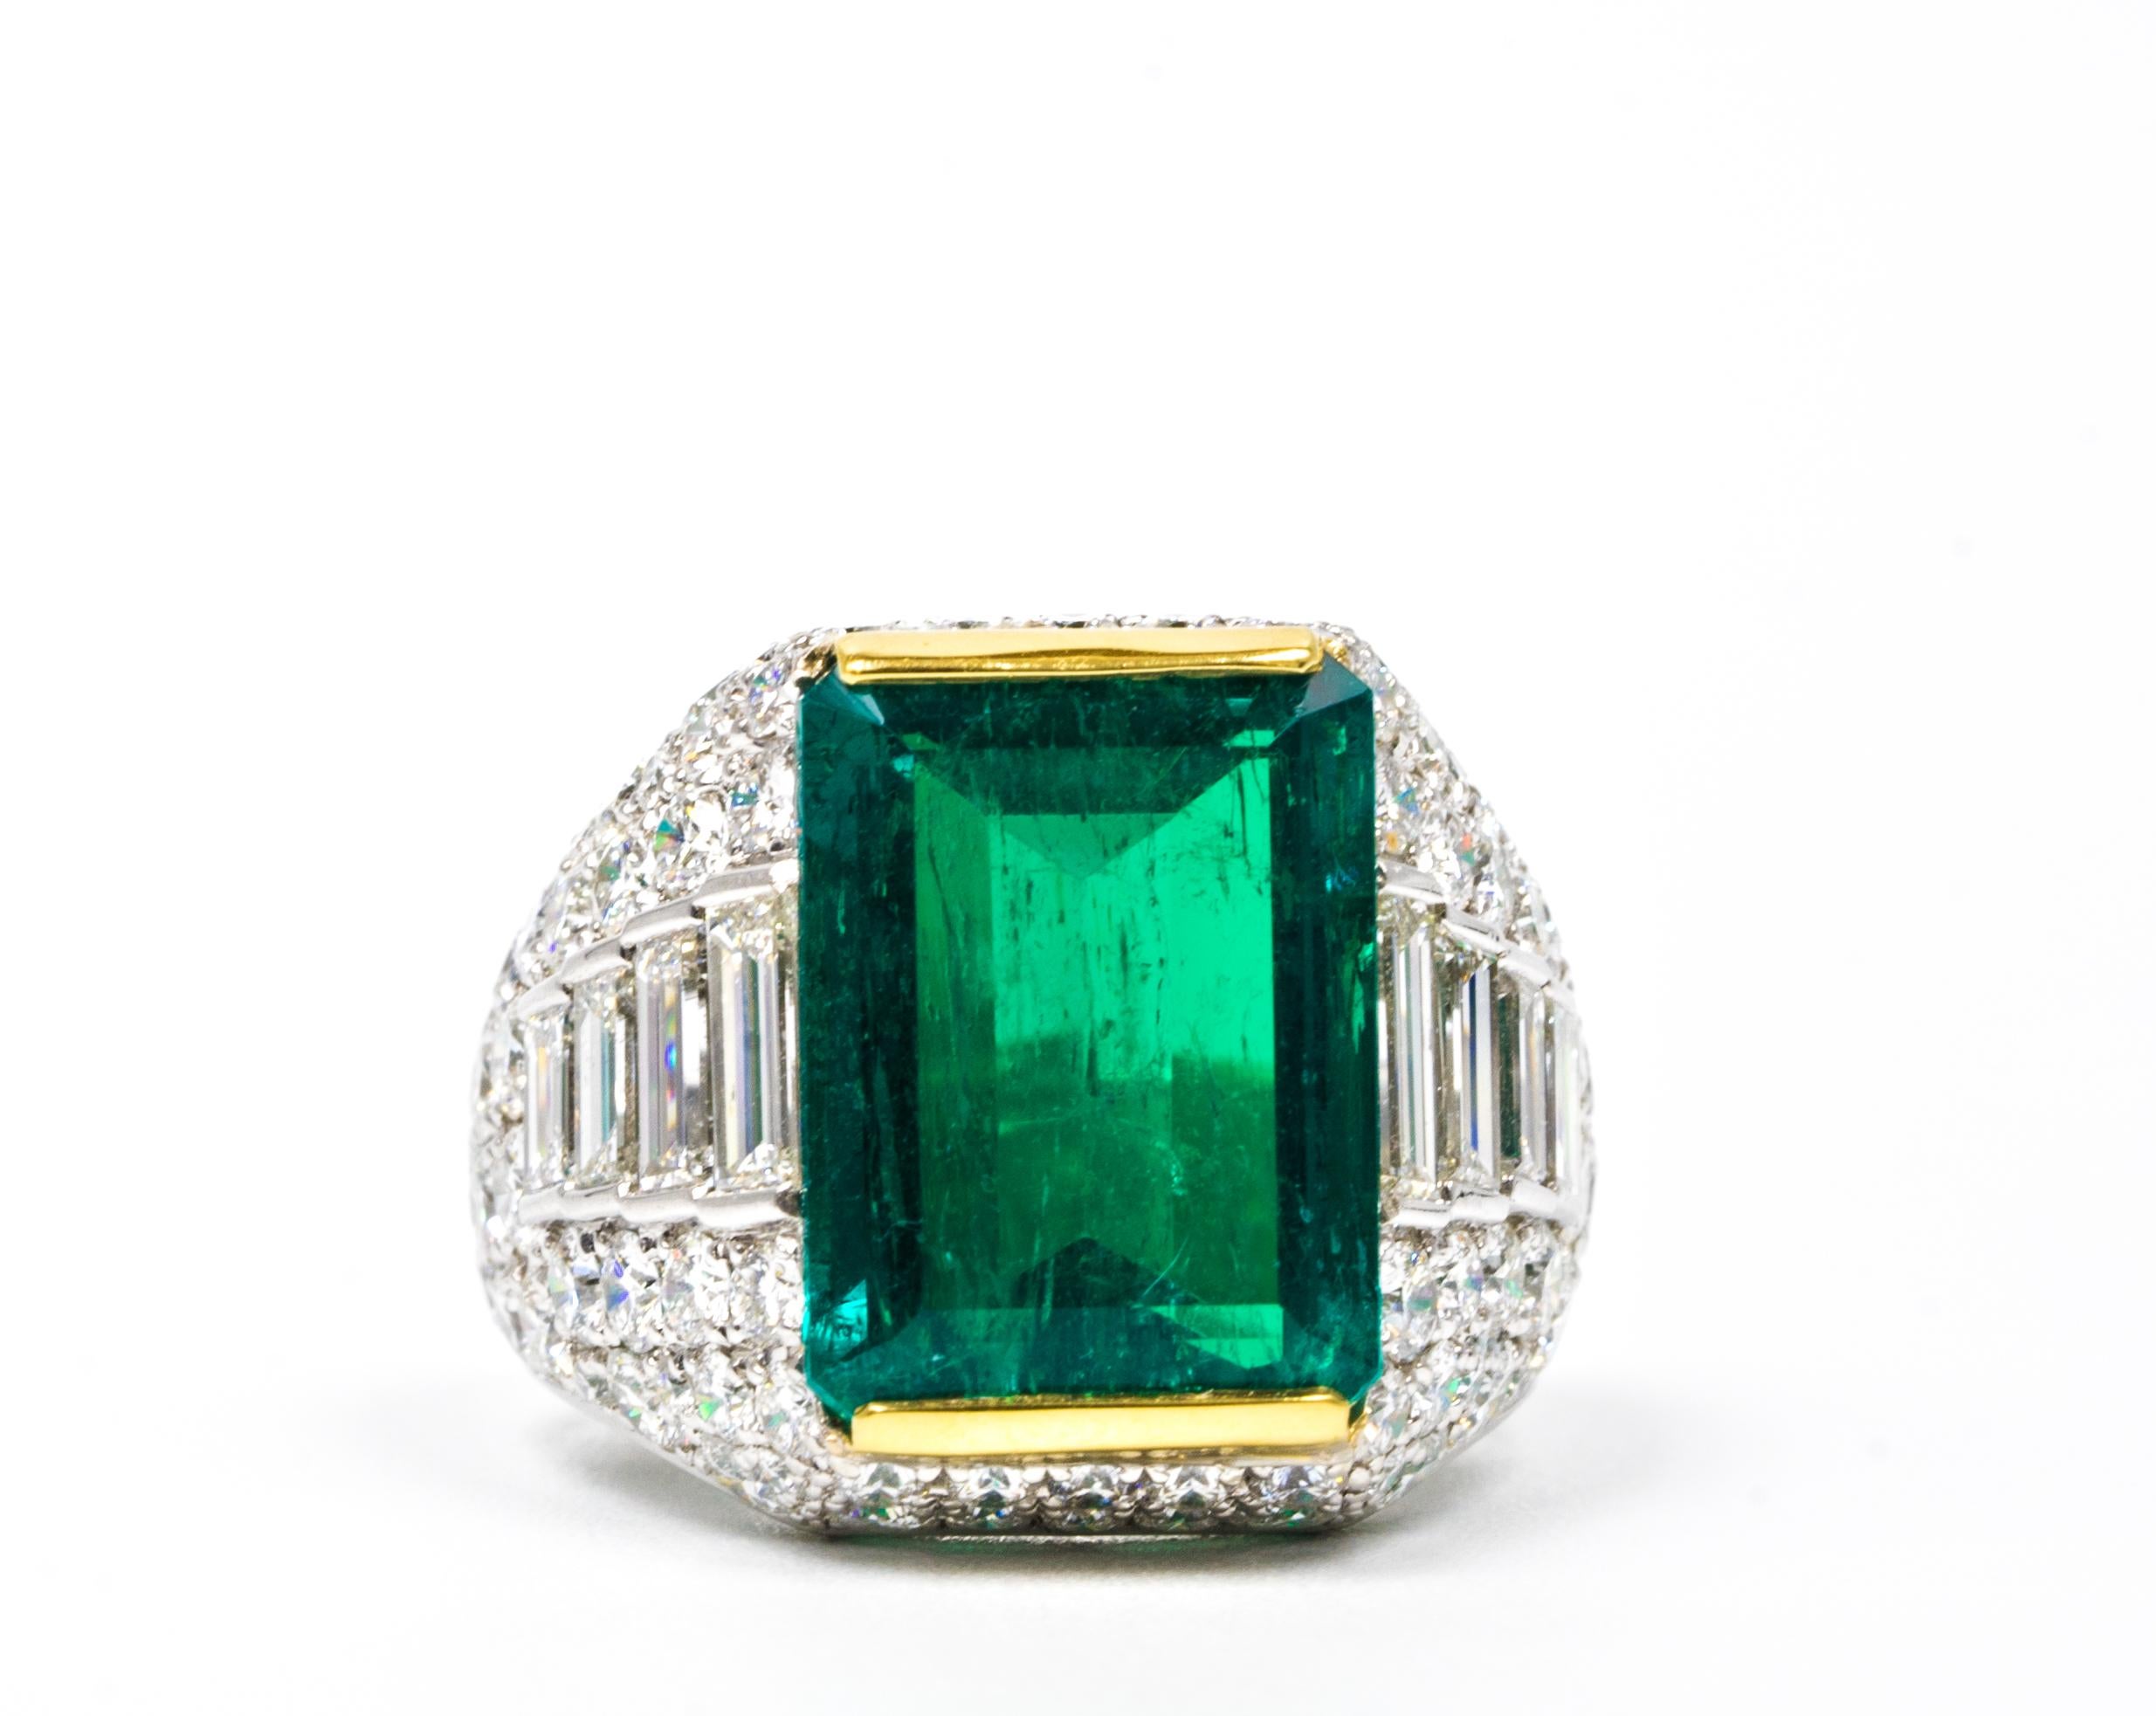 A 6.59 carat Emerald Diamond Ring in Platinum highlighted with 4.79 carats of Round and baguette shaped diamonds.  , D-E color , VVS clarity 
Emerald is Accompanied by AGL certificate number 1080810.


